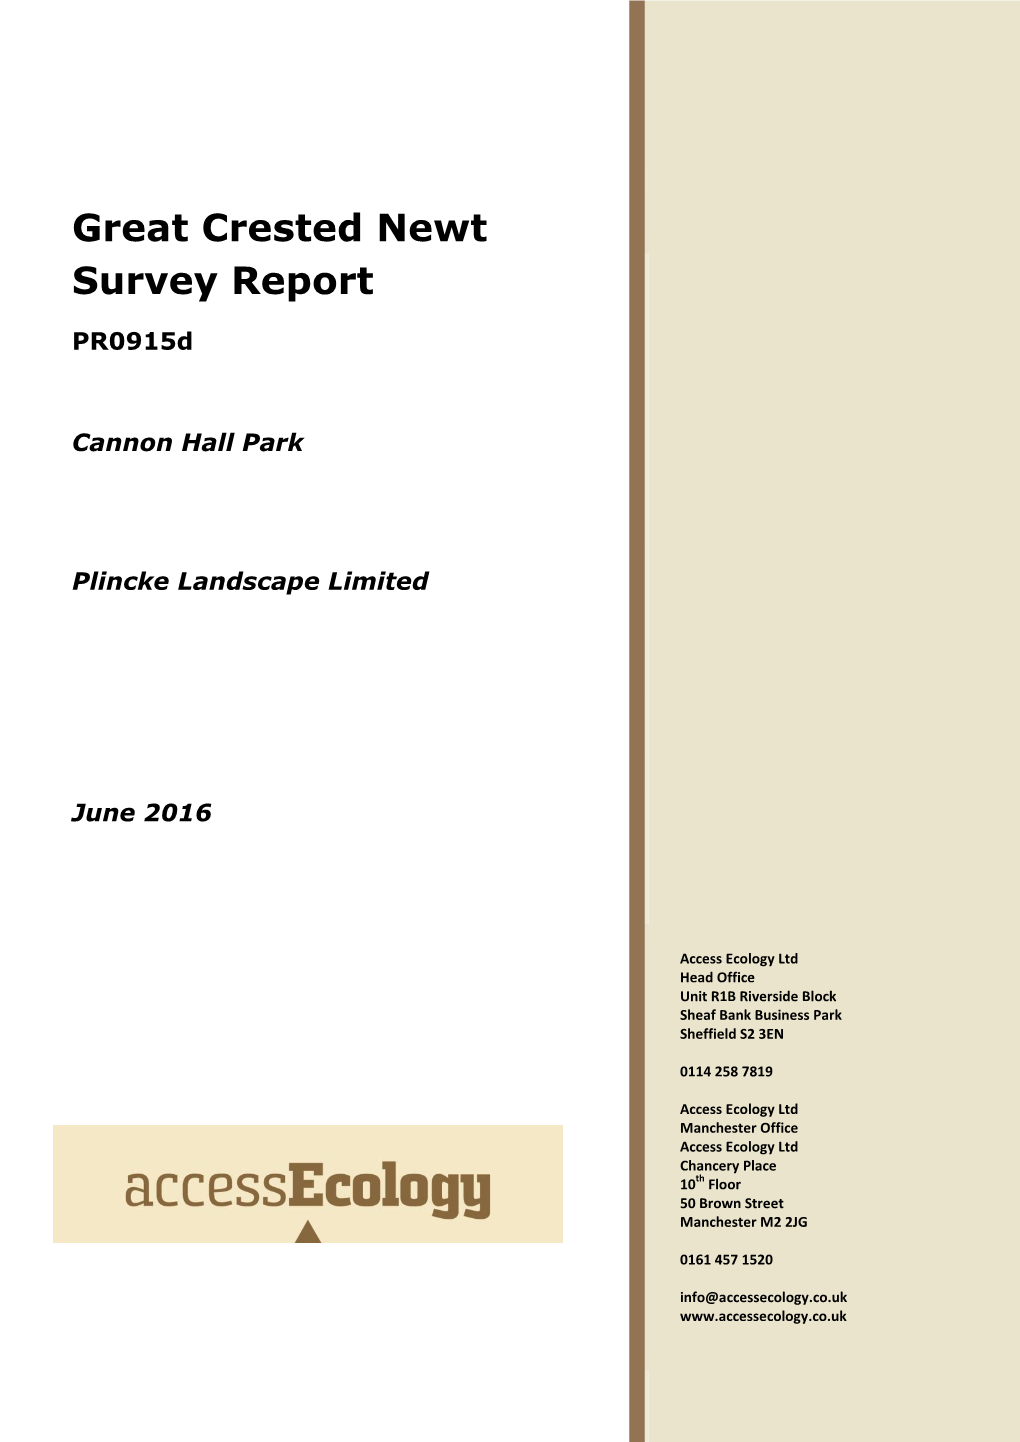 Great Crested Newt Survey Report